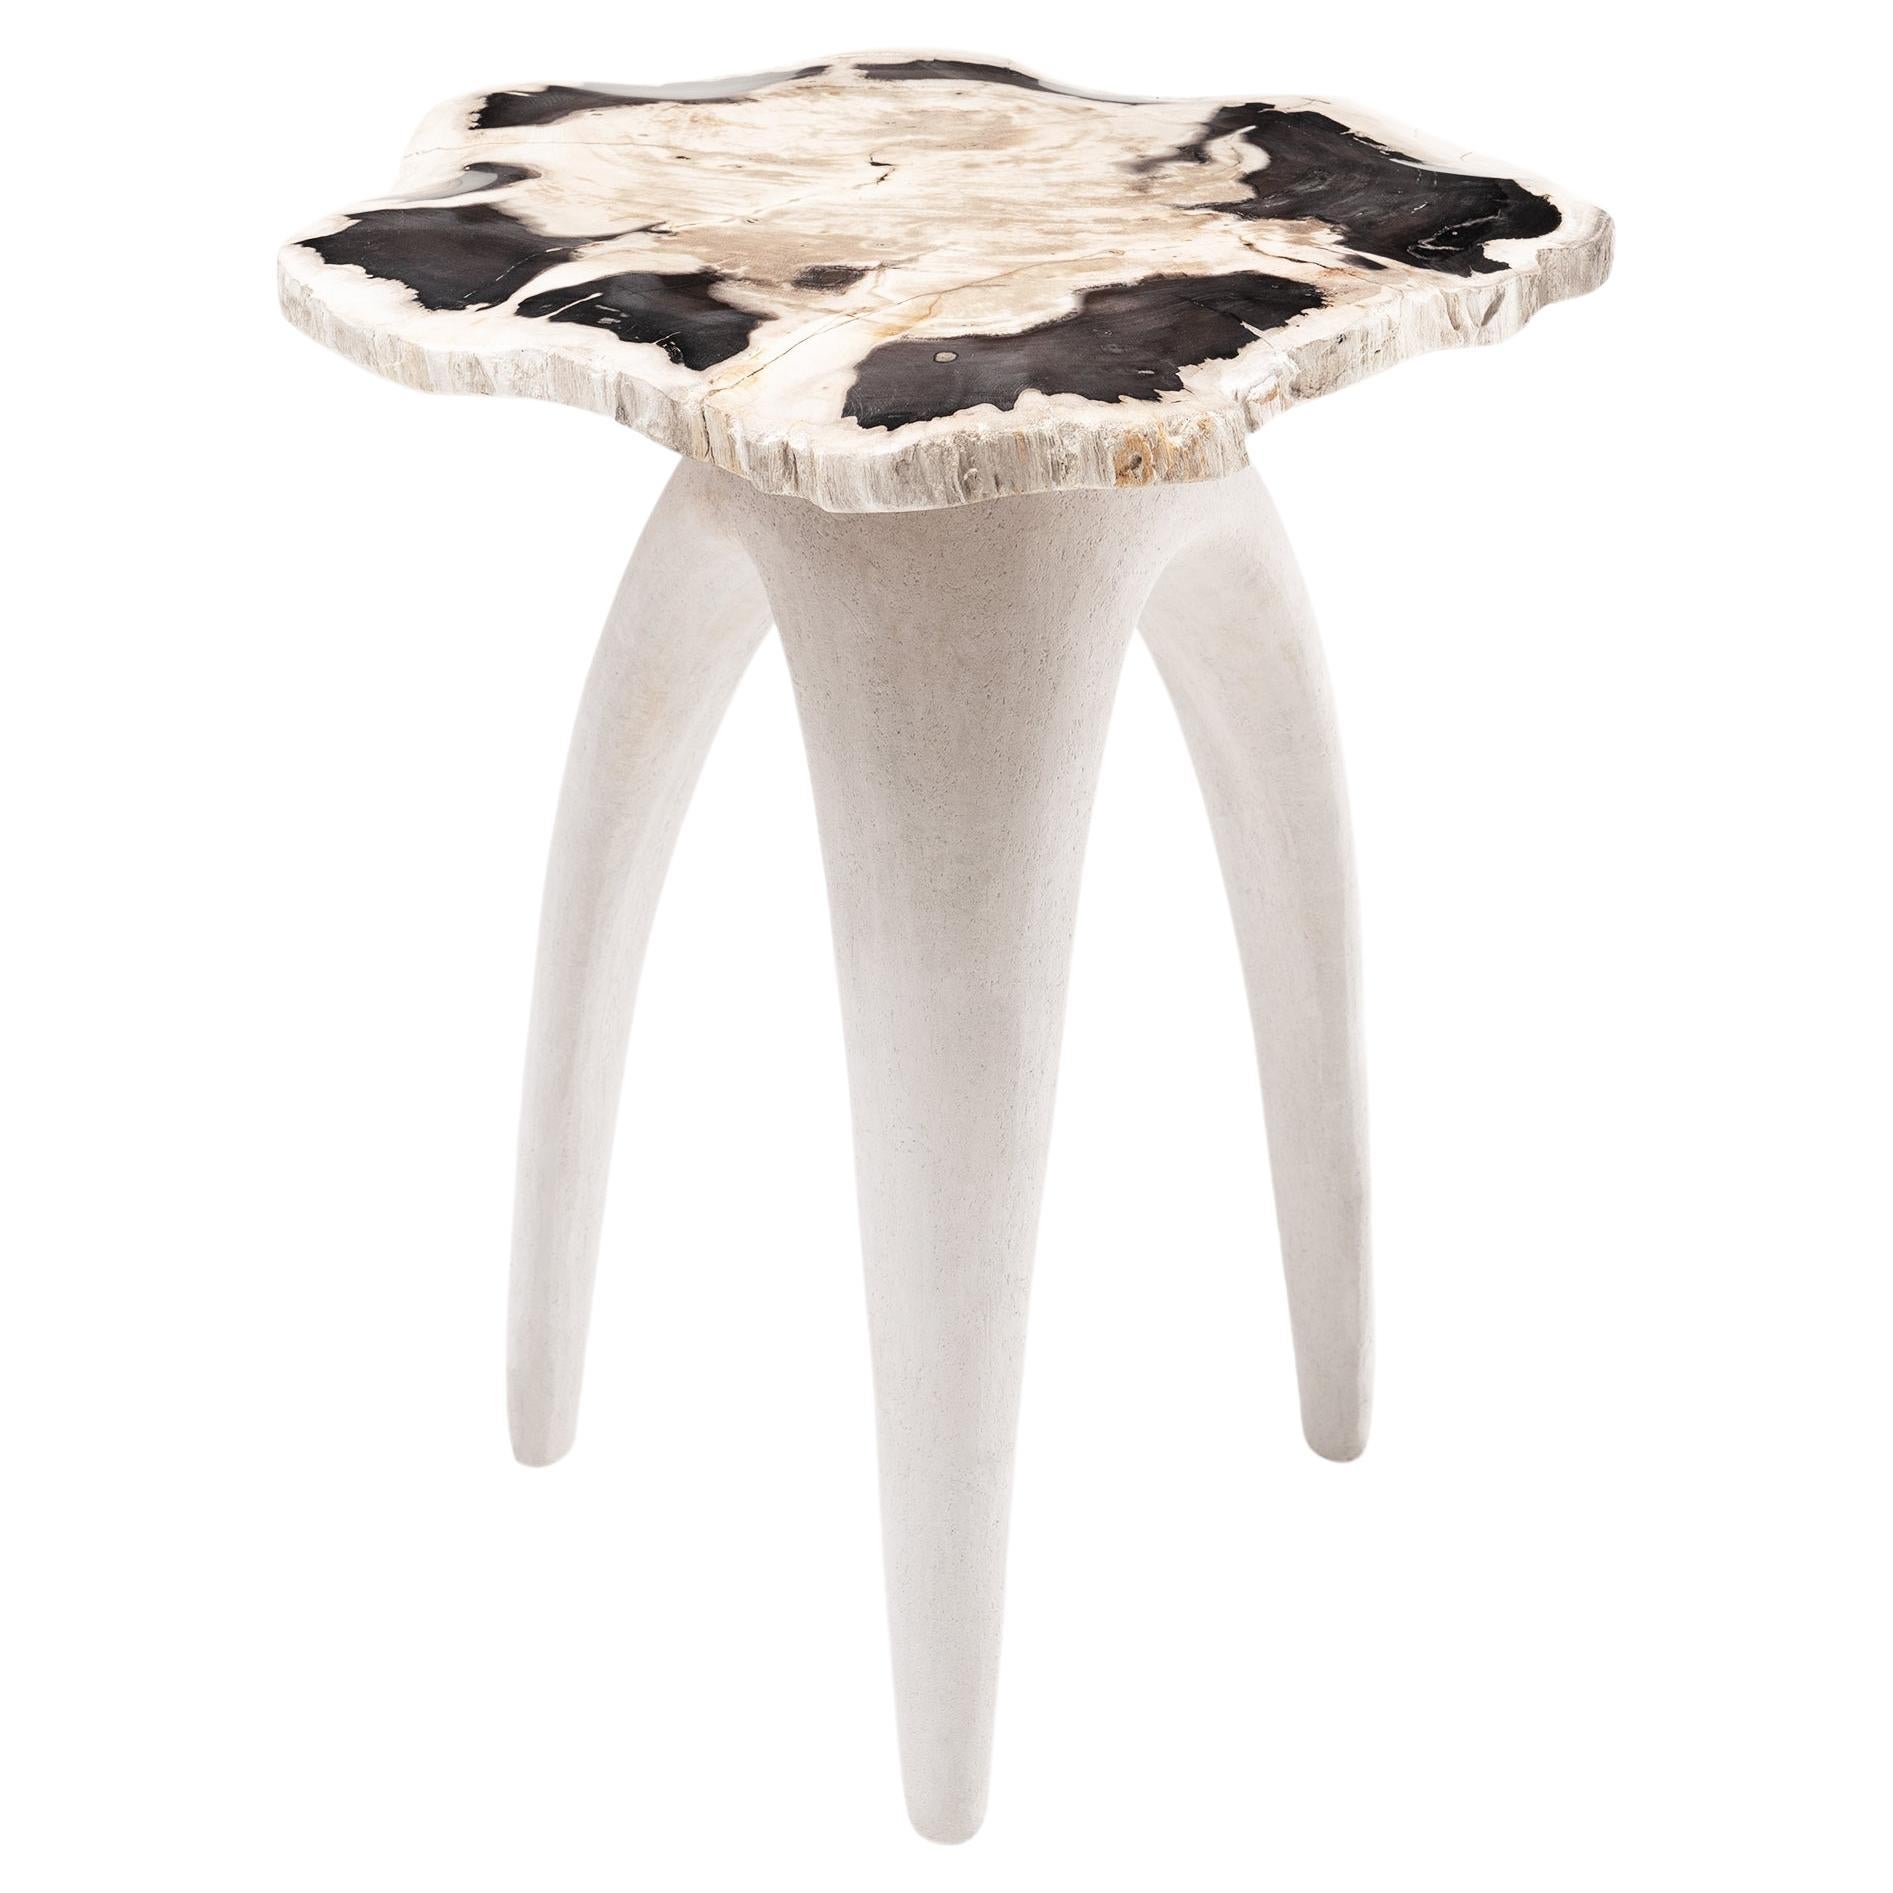 Bermuda Love Triangle • Hand-Carved Solid Petrified Wood Side Table by Odditi For Sale